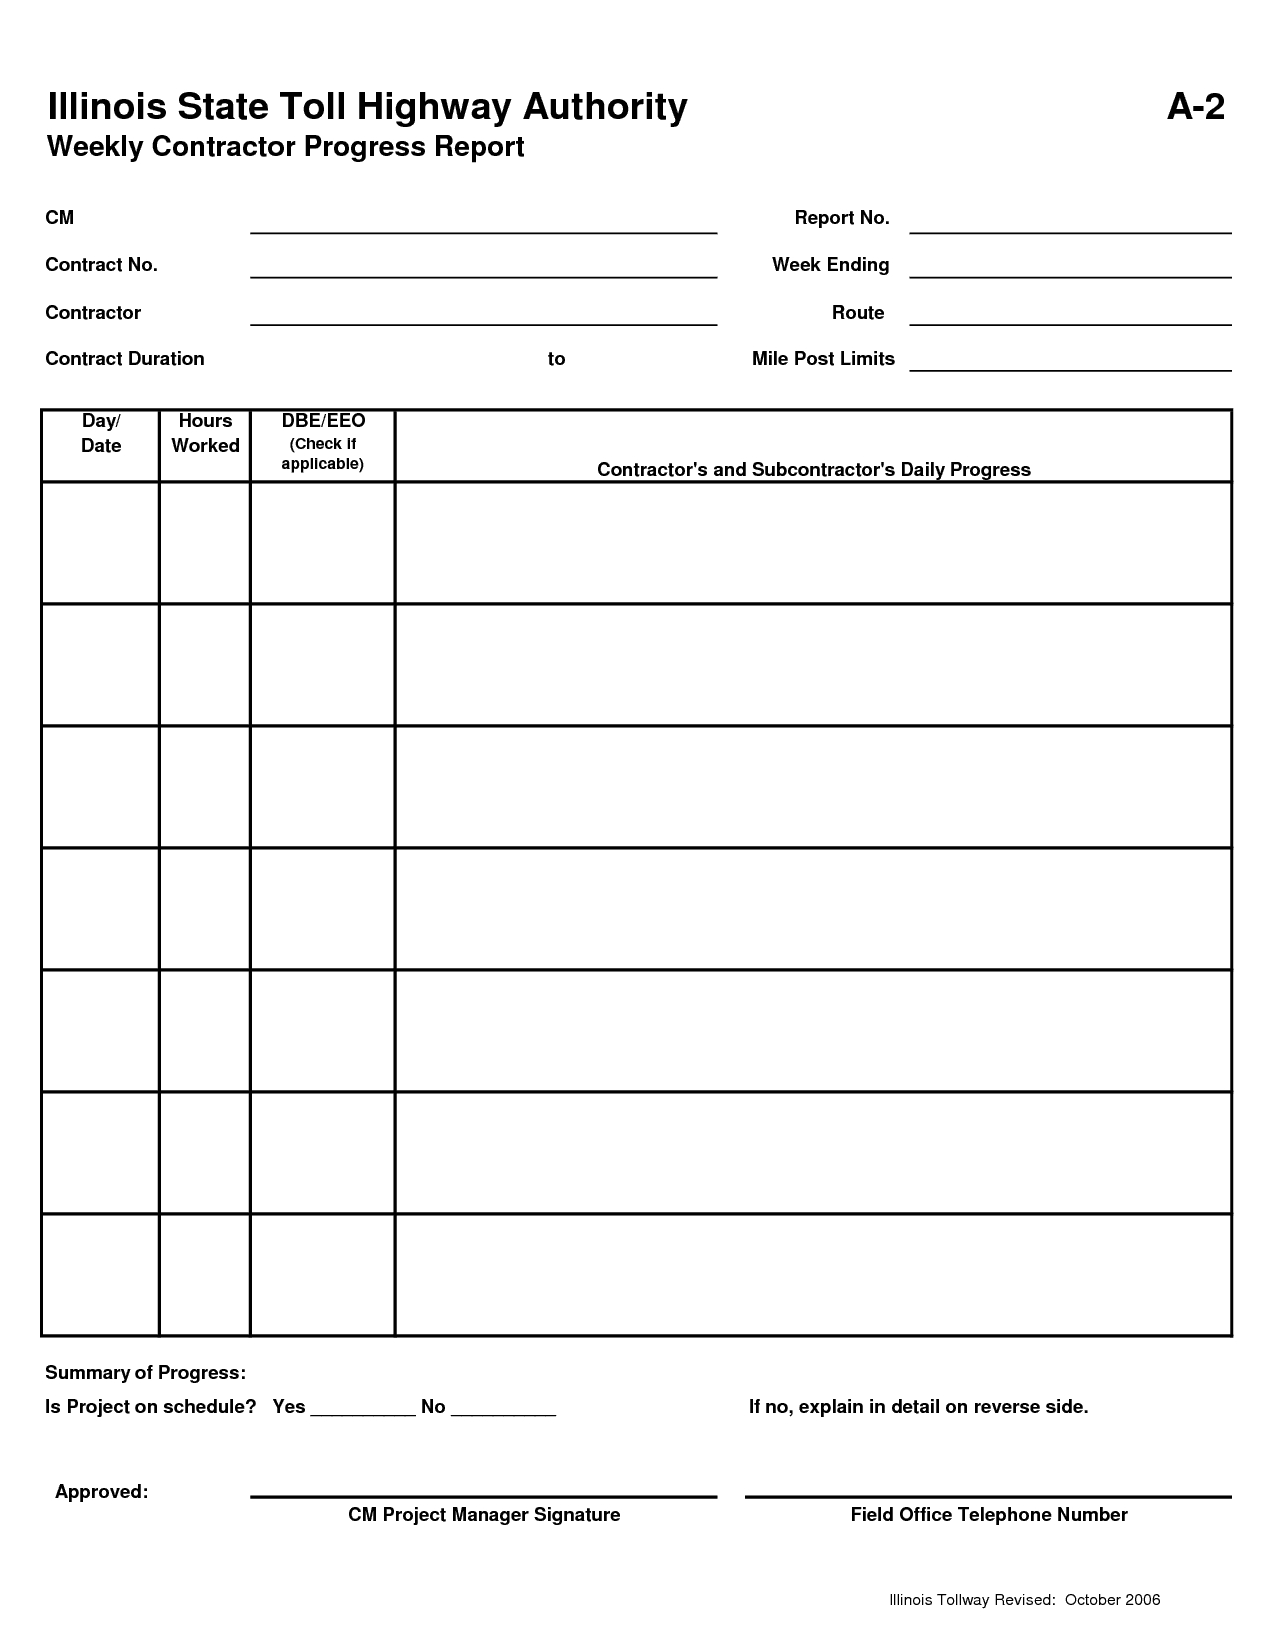 Bookkeeping Eadsheet For Small Business And Gas Station Inside Eeo 1 Report Template